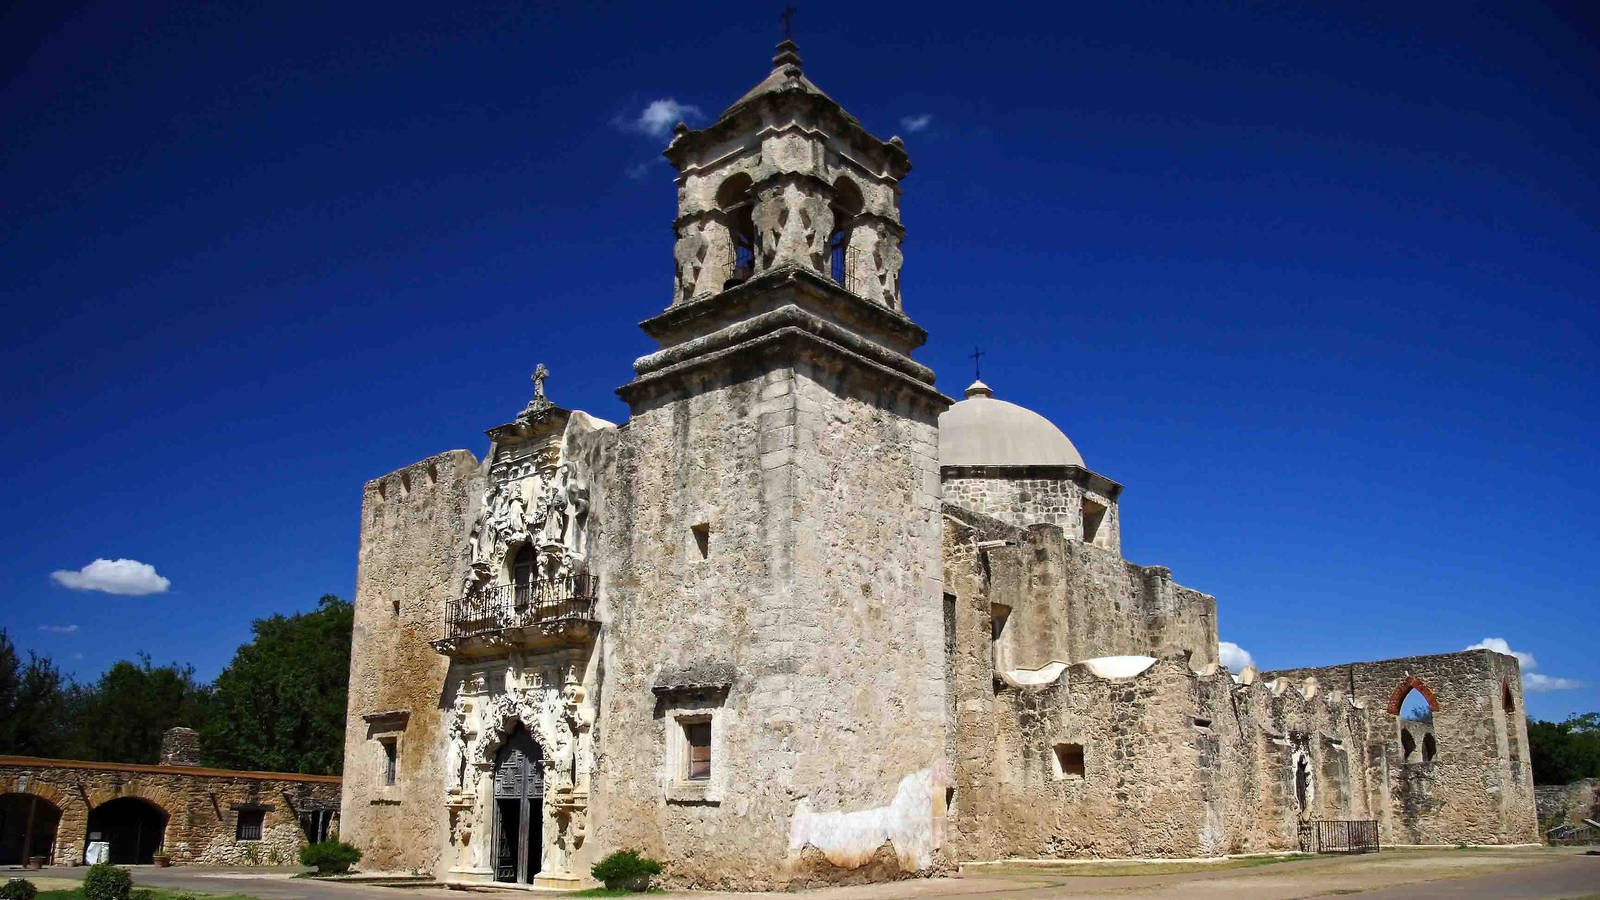 <p>Mission San José is one of four 18th-century mission structures at San Antonio Missions National Historical Park that has received historic preservation treatment. For more information on the missions and other resources at San Antonio Missions click here for the Center for Park Research’s 2008 assessment. </p>